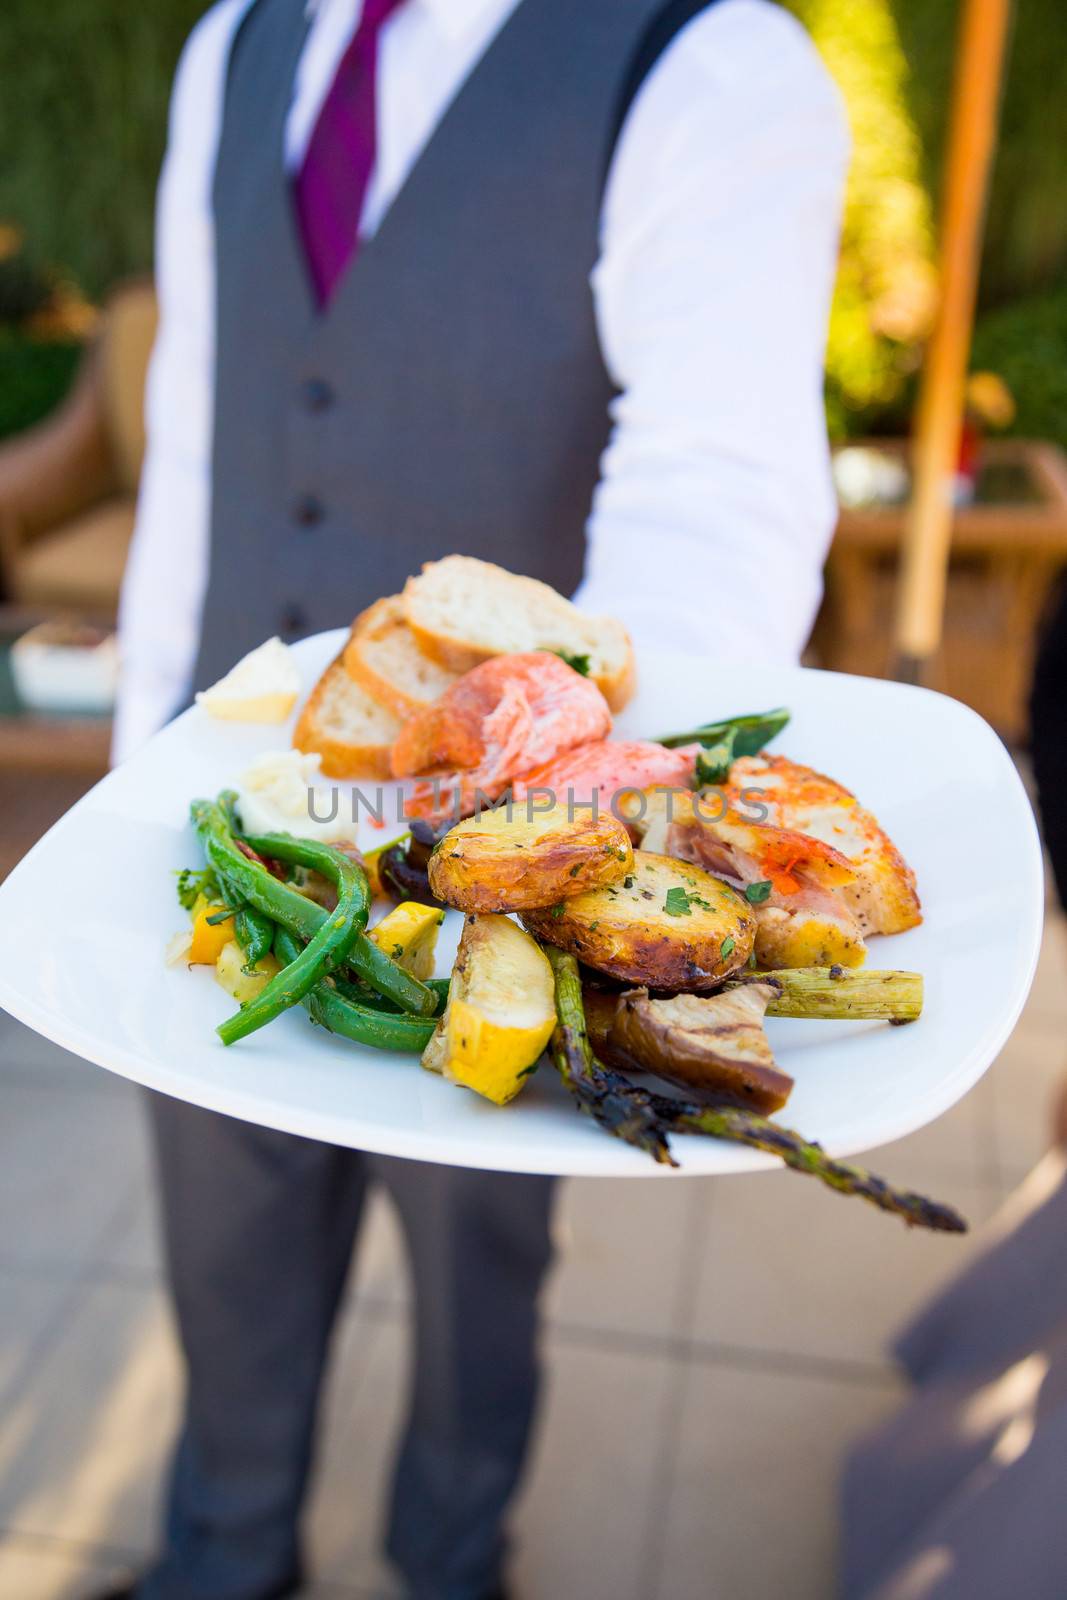 Dinner is served at this beautiful wedding reception outdoors at a vineyard.